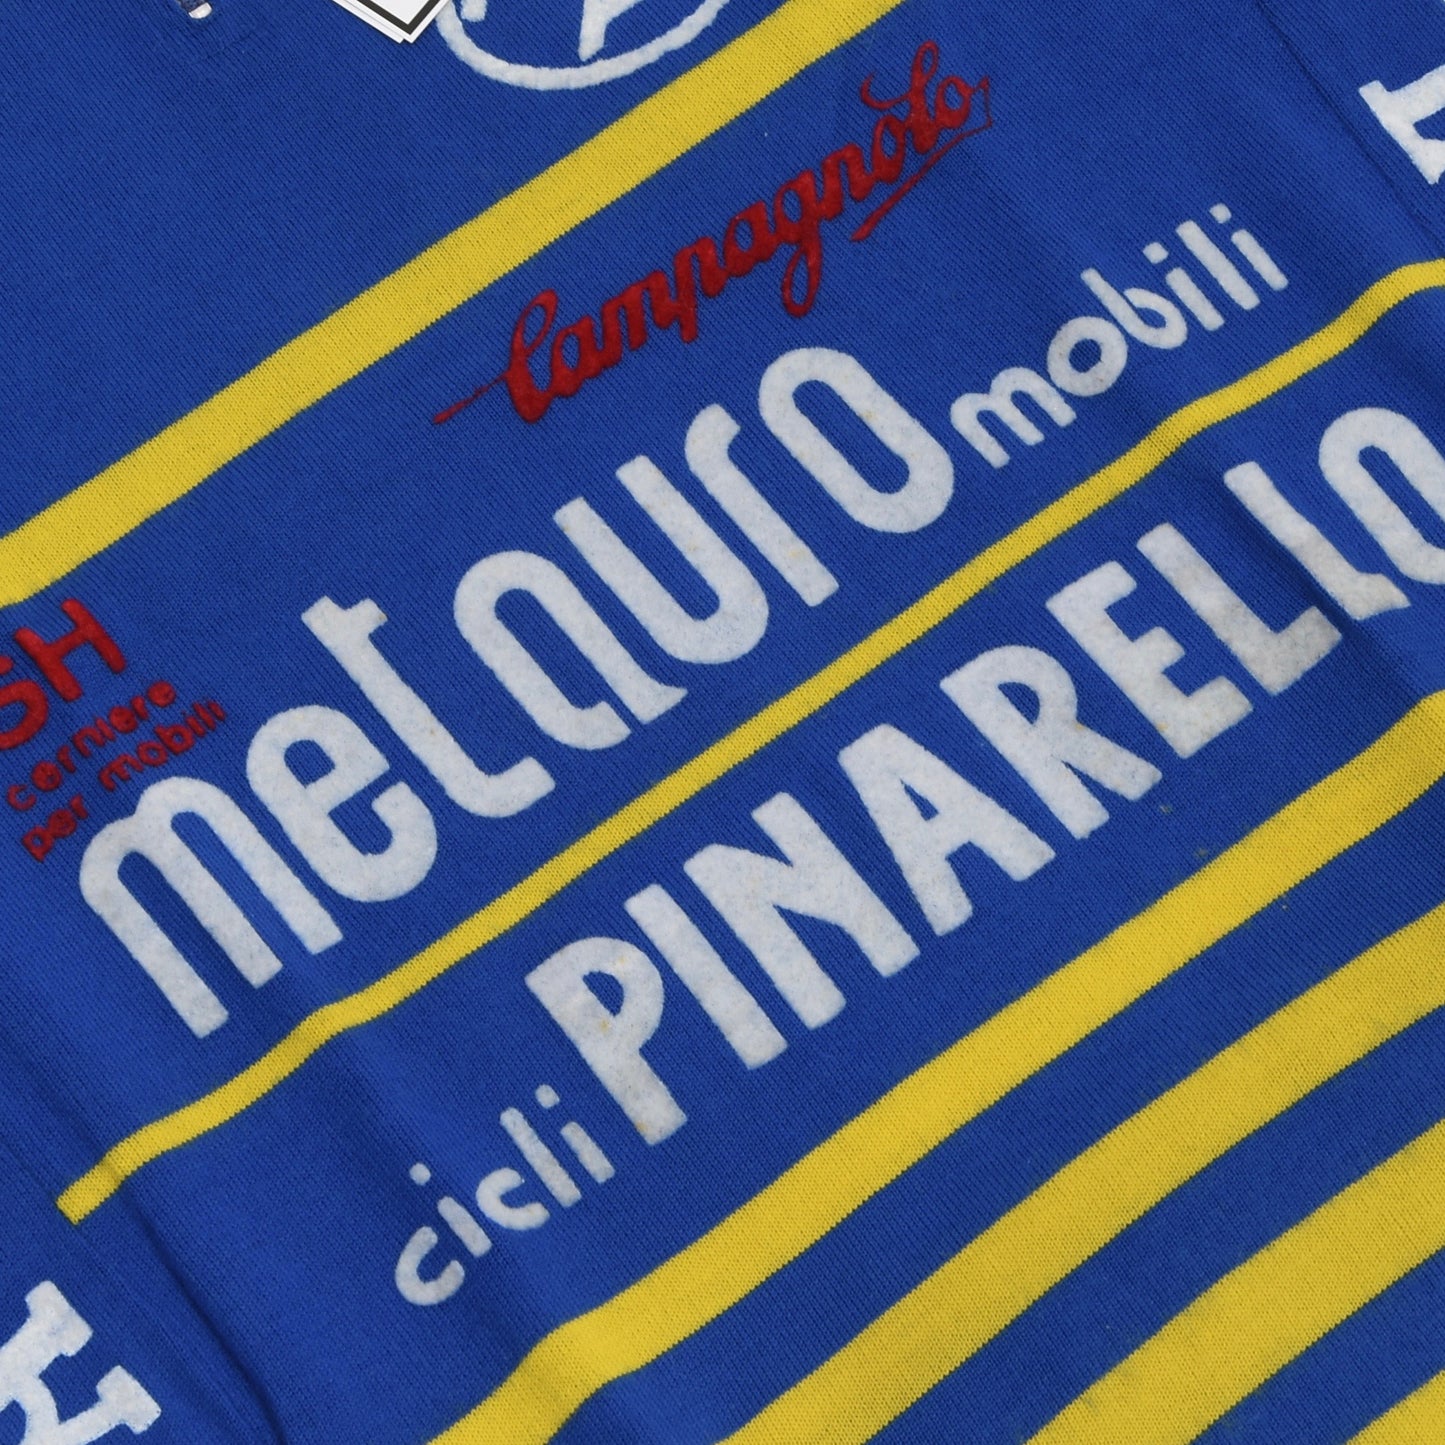 Vintage Wool Blend Pinarello Cycling Jersey - Blue & Yellow